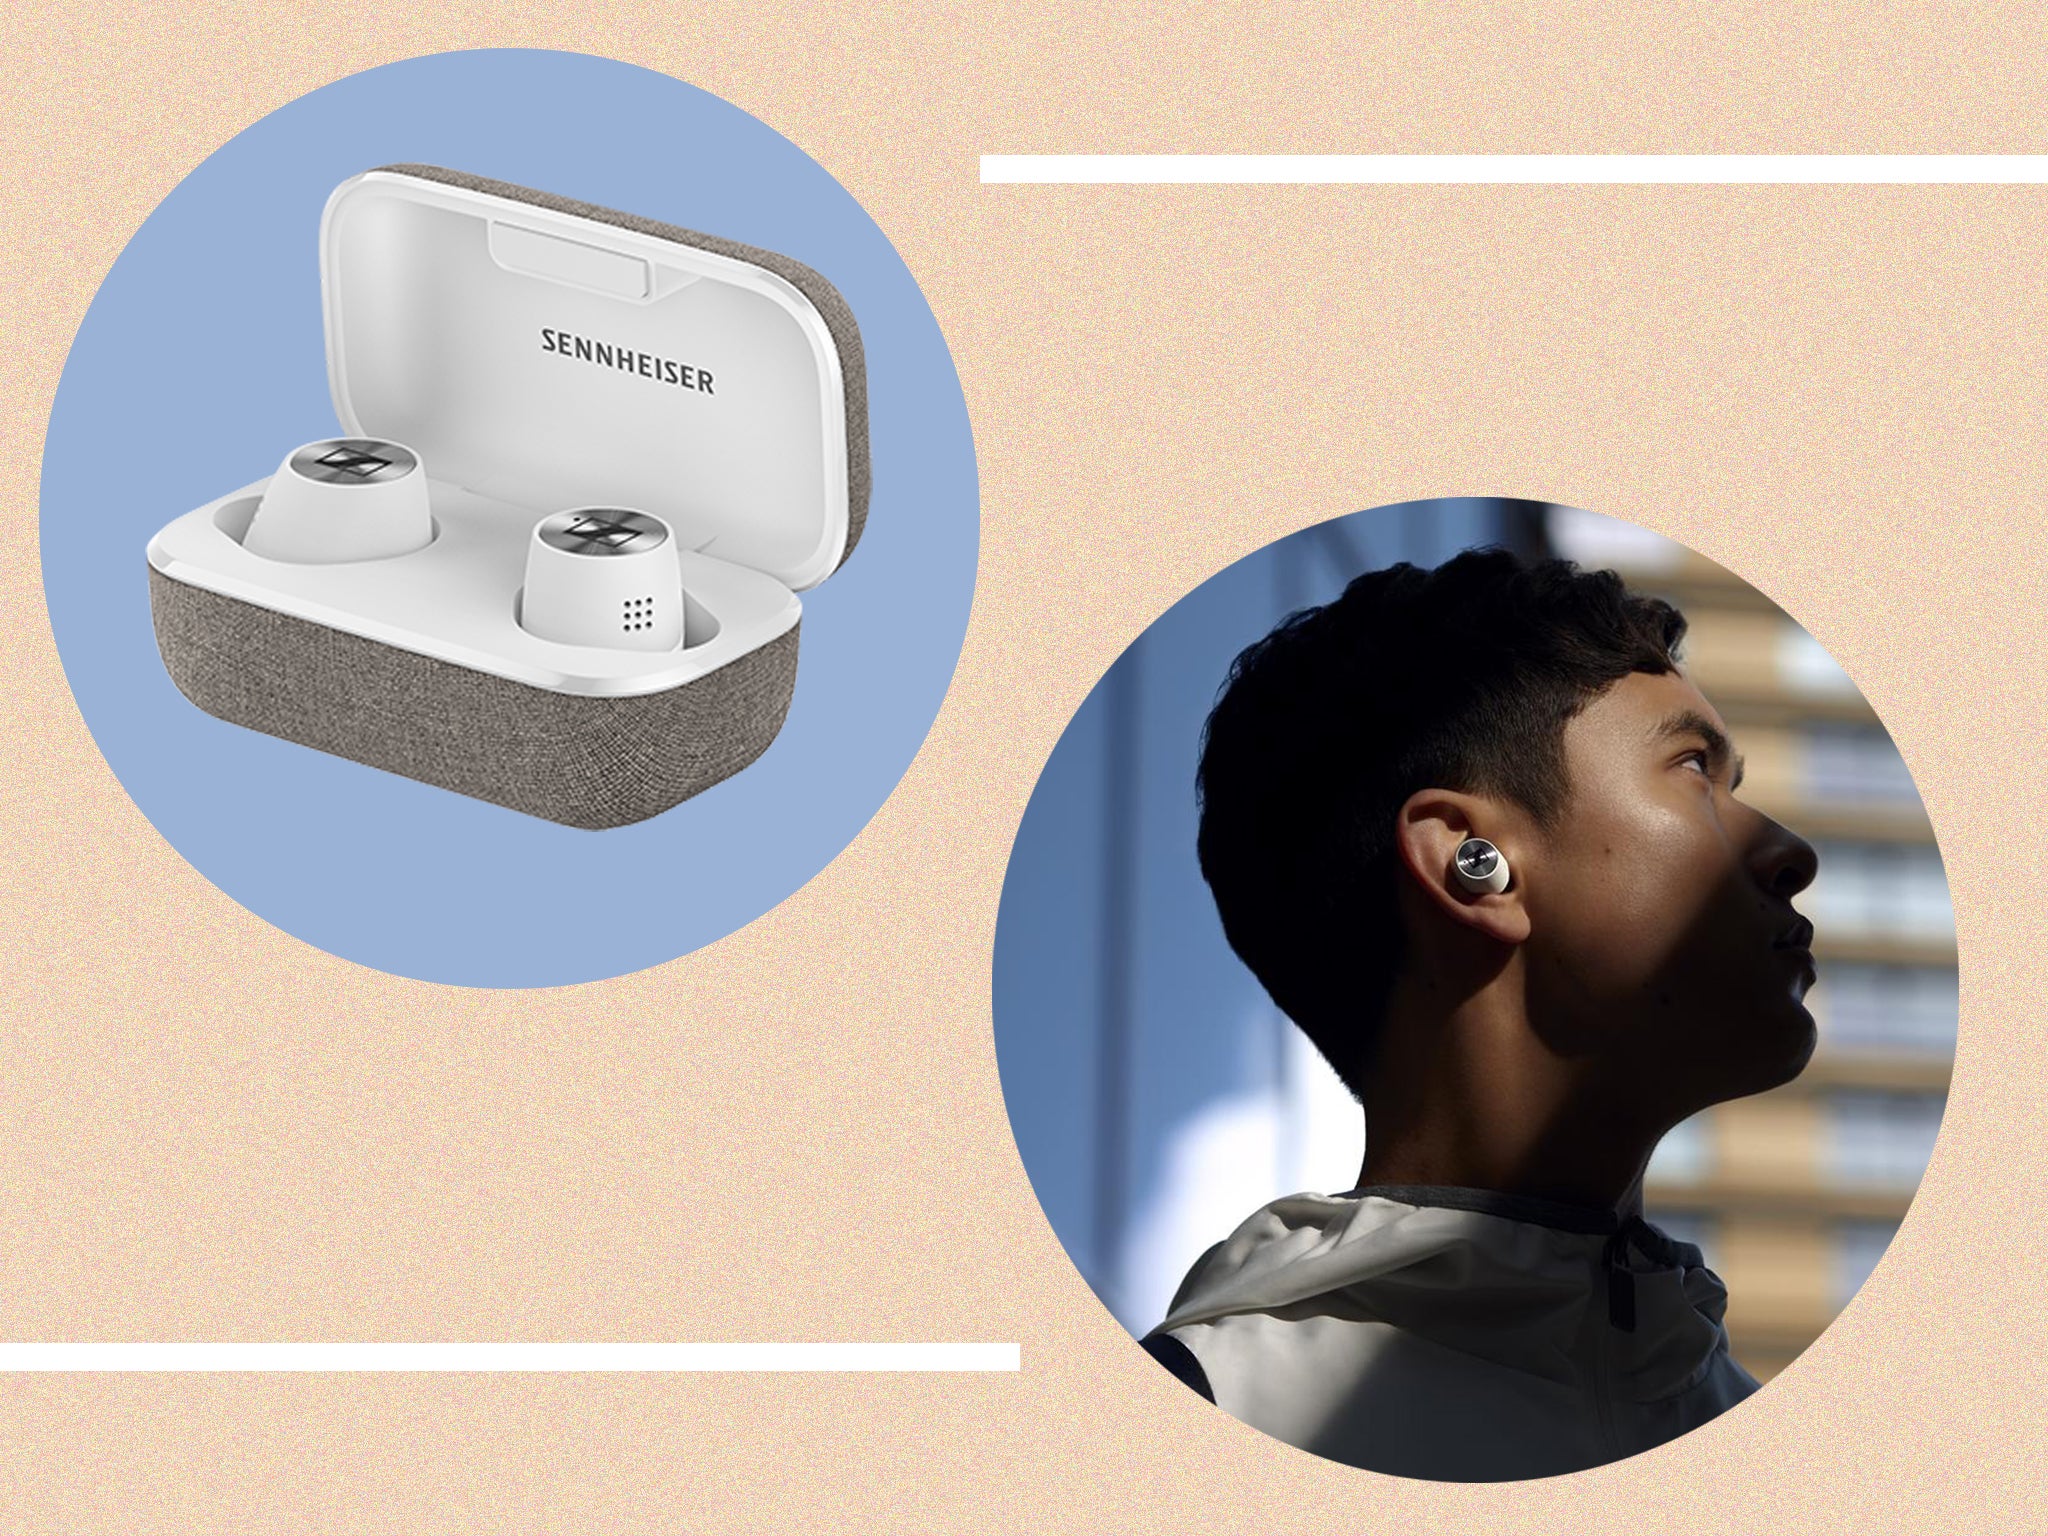 They’re not cheap – but entry level AirPods will set you back £199 – so they’re solid value for money